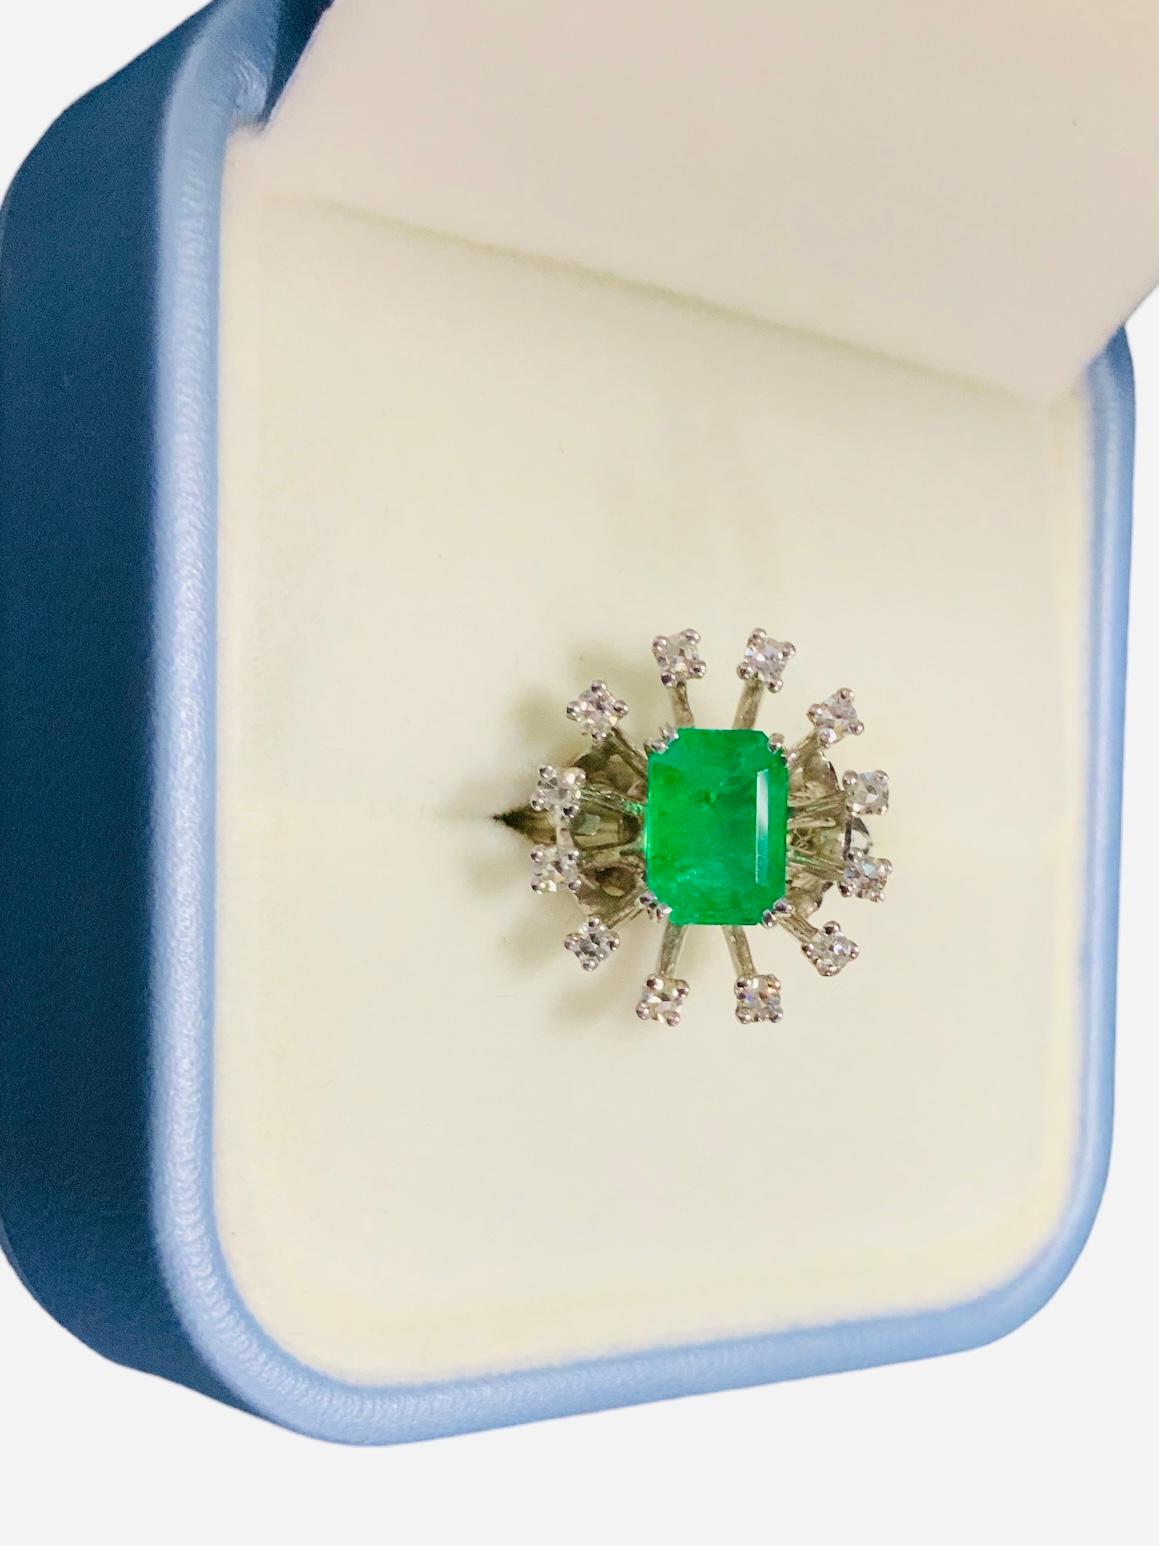 Women's Lady’s 14K White Gold Emerald And Diamonds Ring For Sale